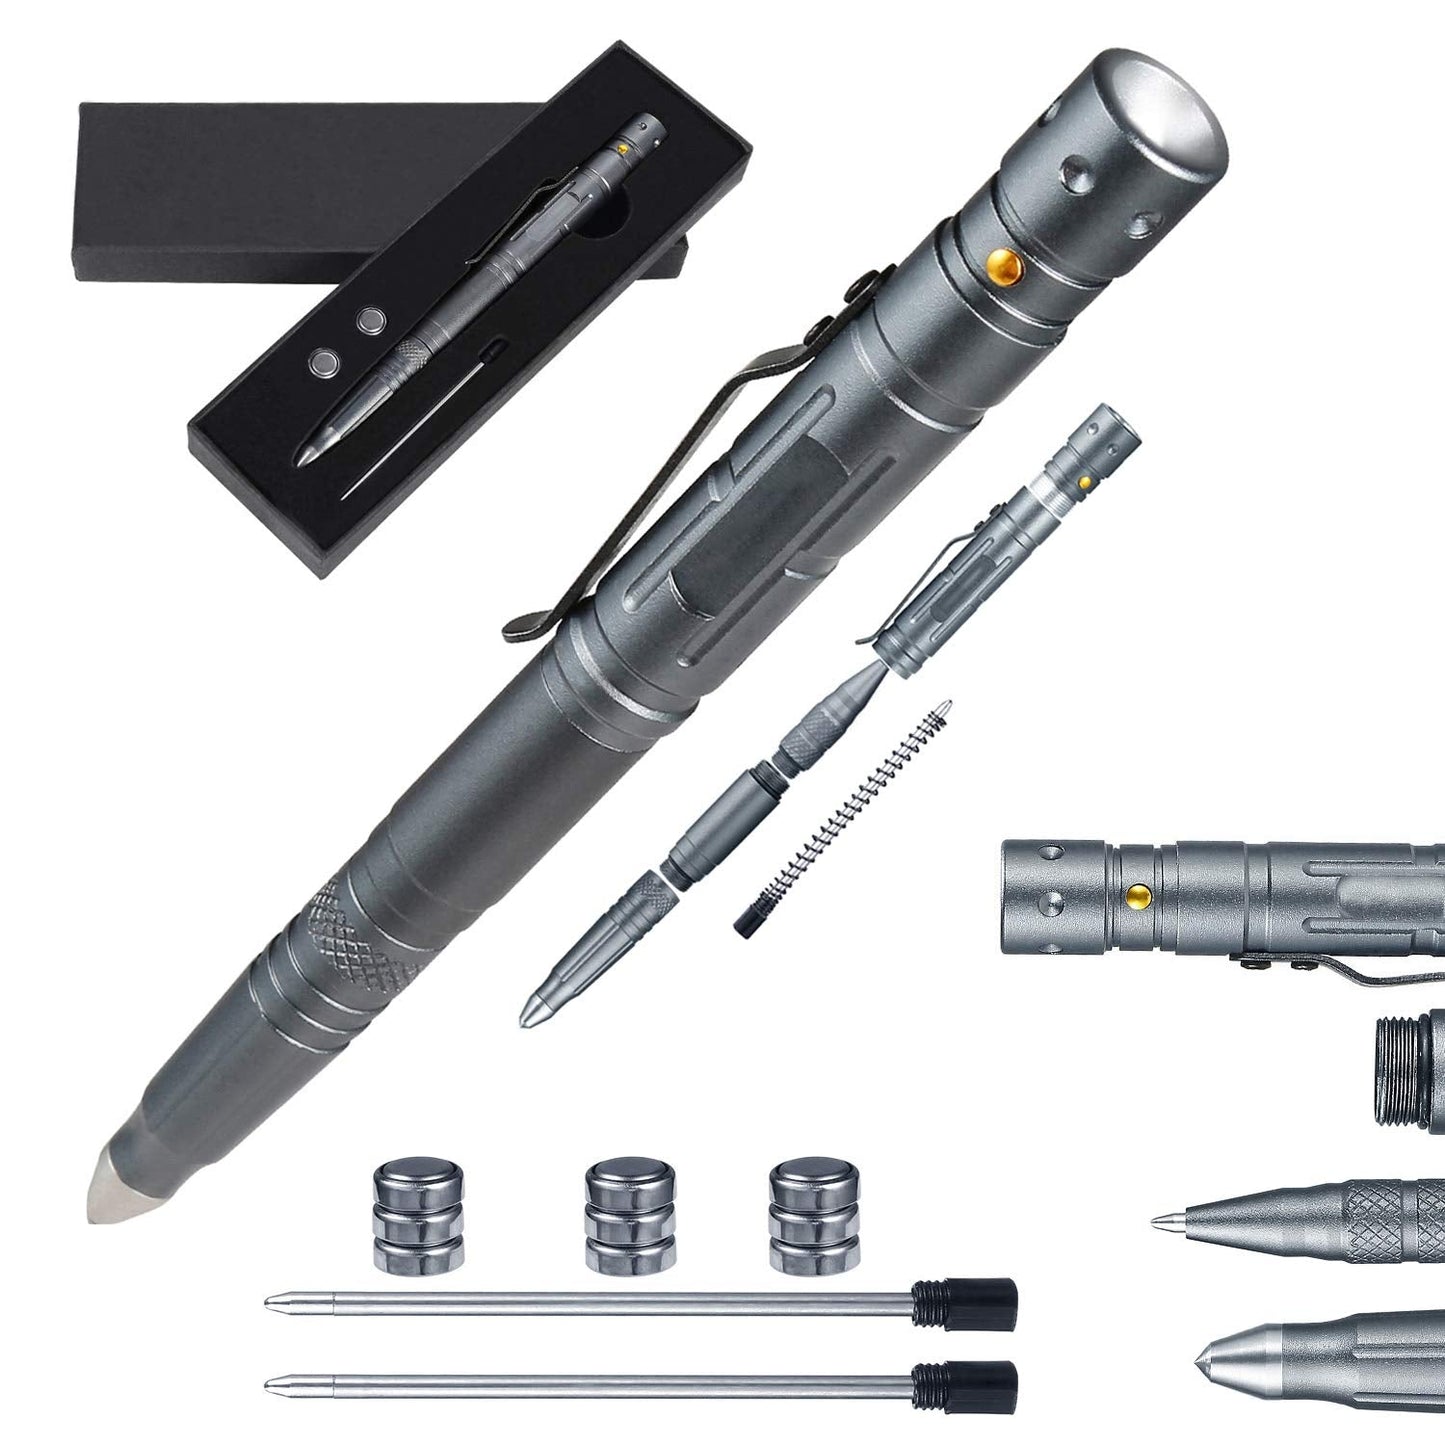 Technical Pens Multi-tool pen for Survival Grade Badass EDC - Tactical Flashlight Glass Breaker Ballpoint Pen Multi Tool - 2 Ink Cartridges 3 Batteries - Gift Boxed - Home Decor Gifts and More